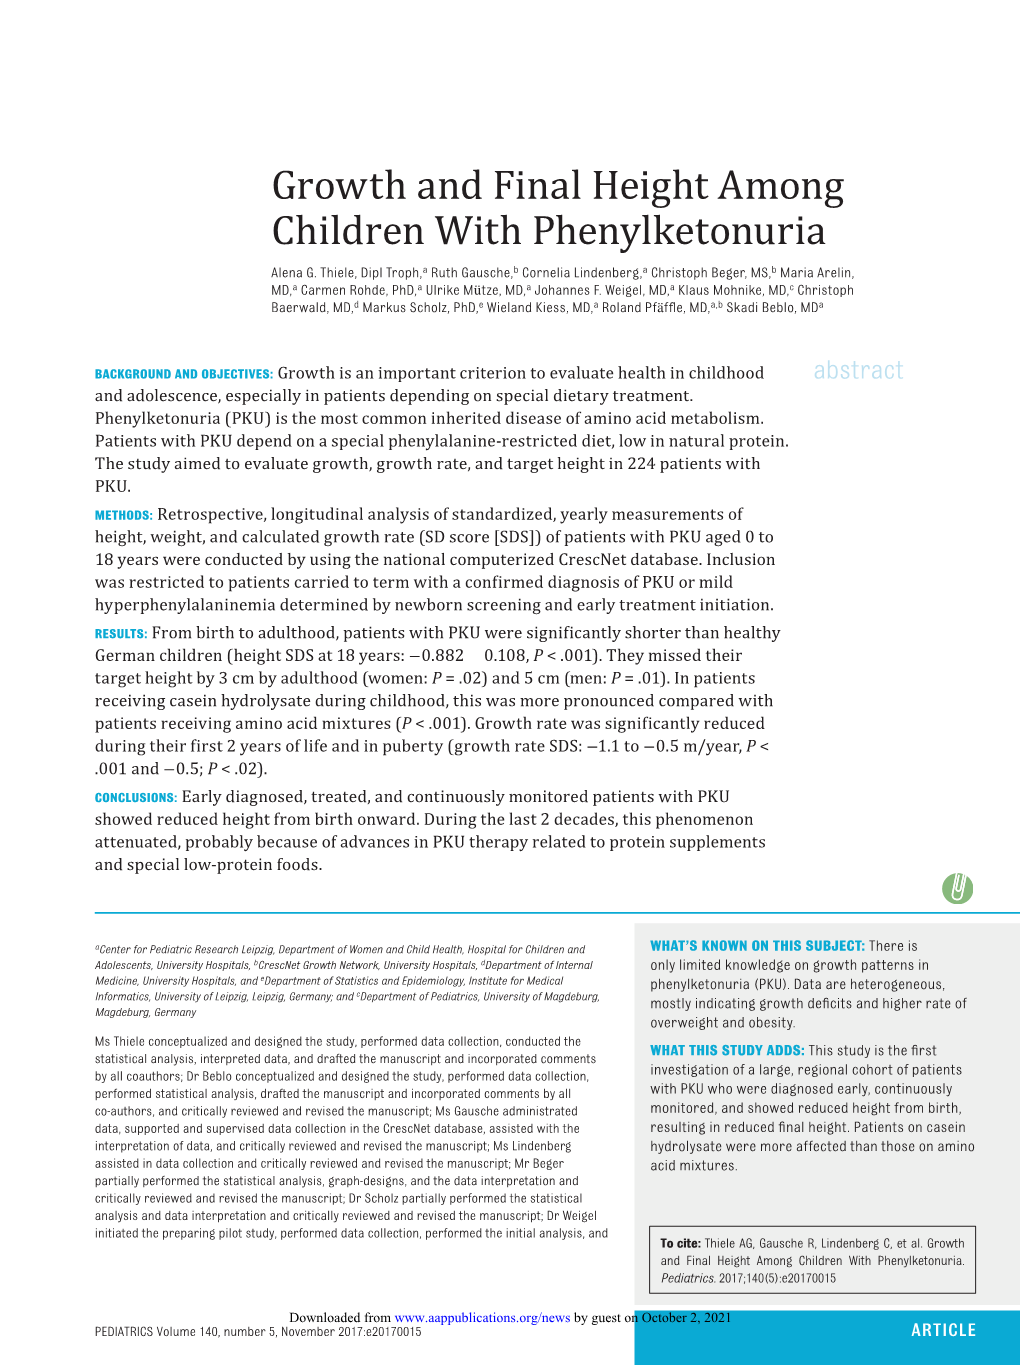 Growth and Final Height Among Children with Phenylketonuria